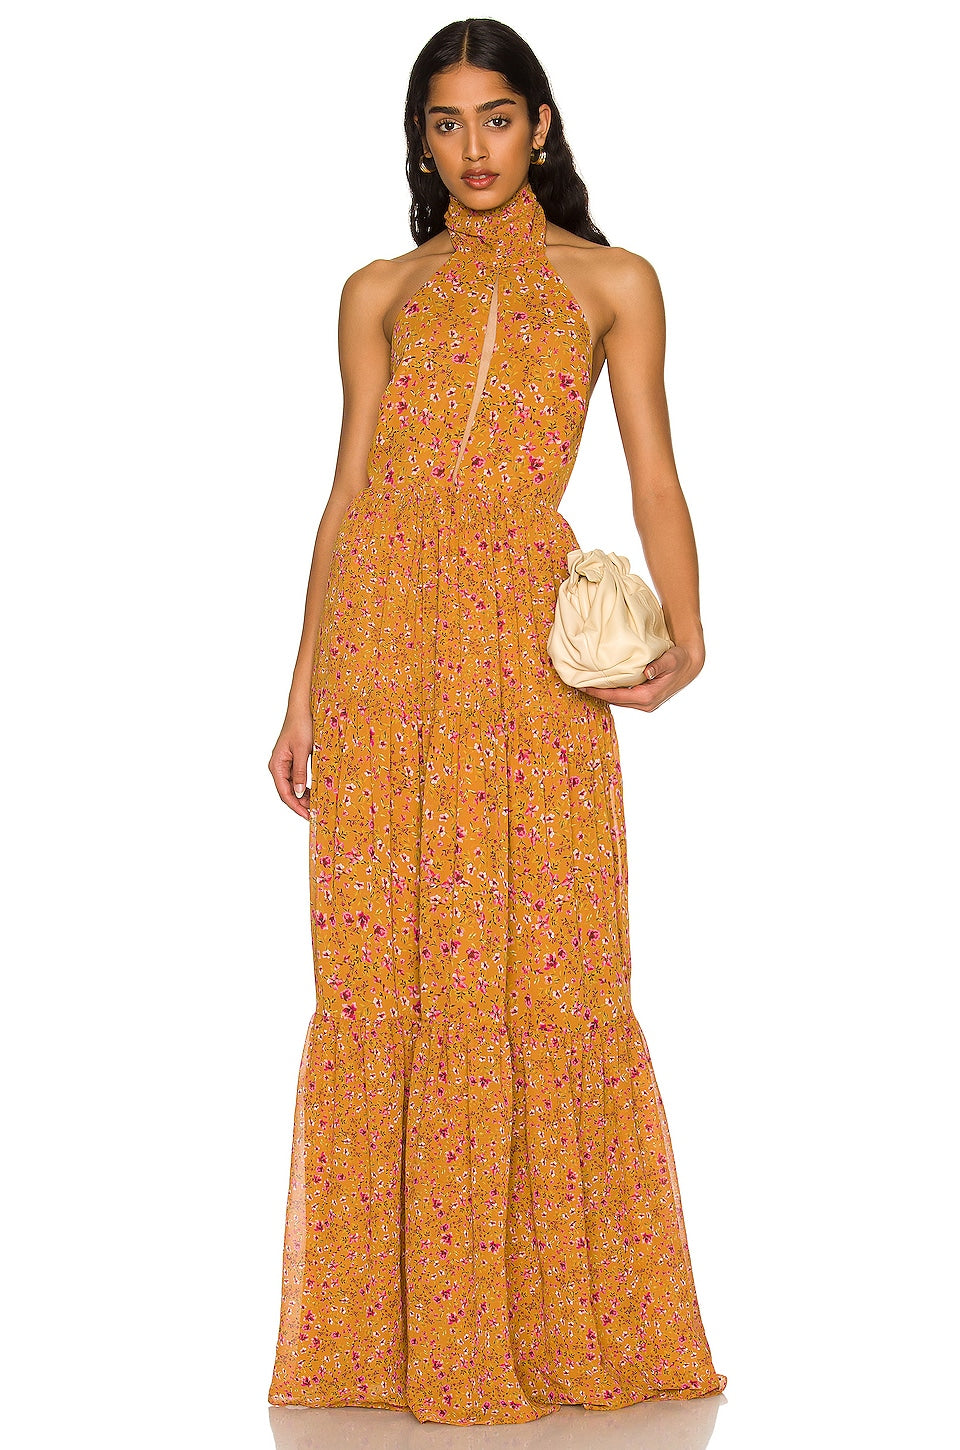 Orion Maxi Dress in LAFAYETTE FLORAL